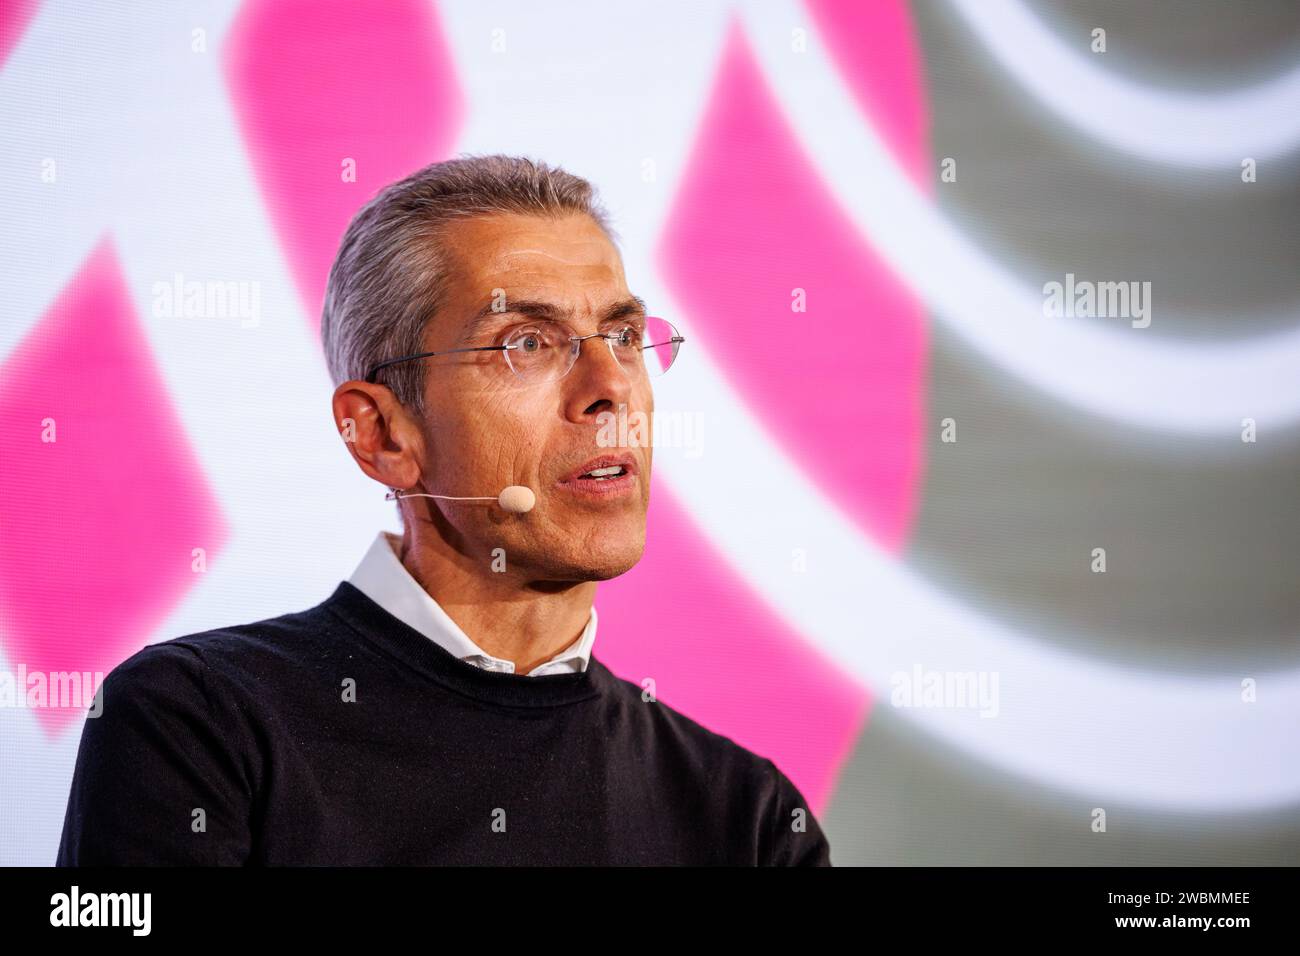 Munich, Germany. 11th Jan, 2024. Michael Diederich, Deputy CEO and CFO of FC Bayern, speaks at the Digital Life Design (DLD) innovation conference. DLD is a conference on internet trends and developments in digitalization. Credit: Matthias Balk/dpa/Alamy Live News Stock Photo